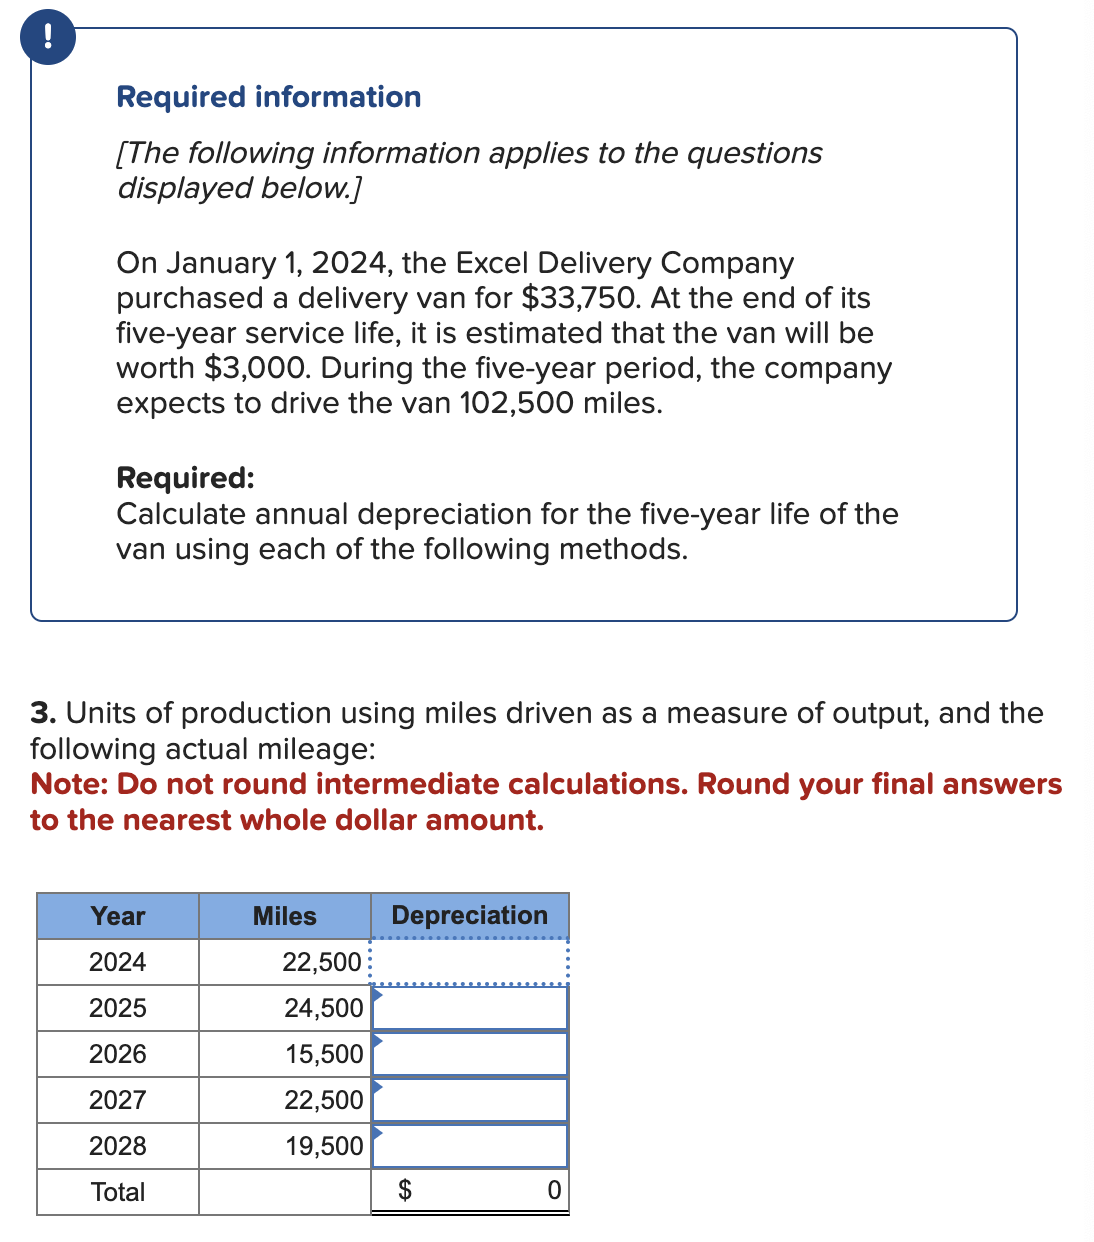 Required information
[The following information applies to the questions
displayed below.]
On January 1, 2024, the Excel Delivery Company
purchased a delivery van for $33,750. At the end of its
five-year service life, it is estimated that the van will be
worth $3,000. During the five-year period, the company
expects to drive the van 102,500 miles.
Required:
Calculate annual depreciation for the five-year life of the
van using each of the following methods.
3. Units of production using miles driven as a measure of output, and the
following actual mileage:
Note: Do not round intermediate calculations. Round your final answers
to the nearest whole dollar amount.
Year
Miles
Depreciation
2024
22,500
2025
24,500
2026
15,500
2027
22,500
2028
19,500
Total
0